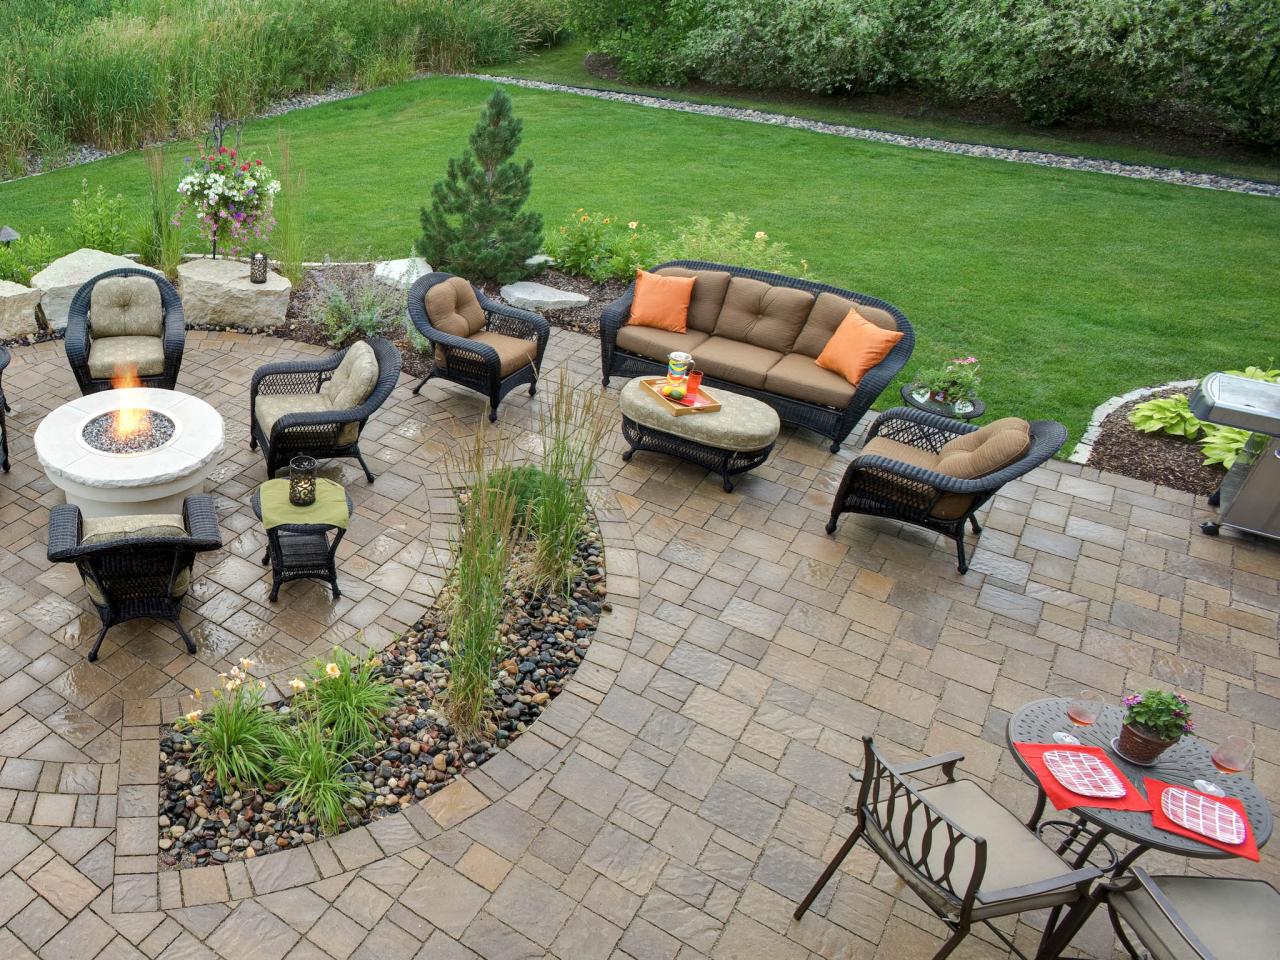 A beautifully designed outdoor space with interlocking pavers